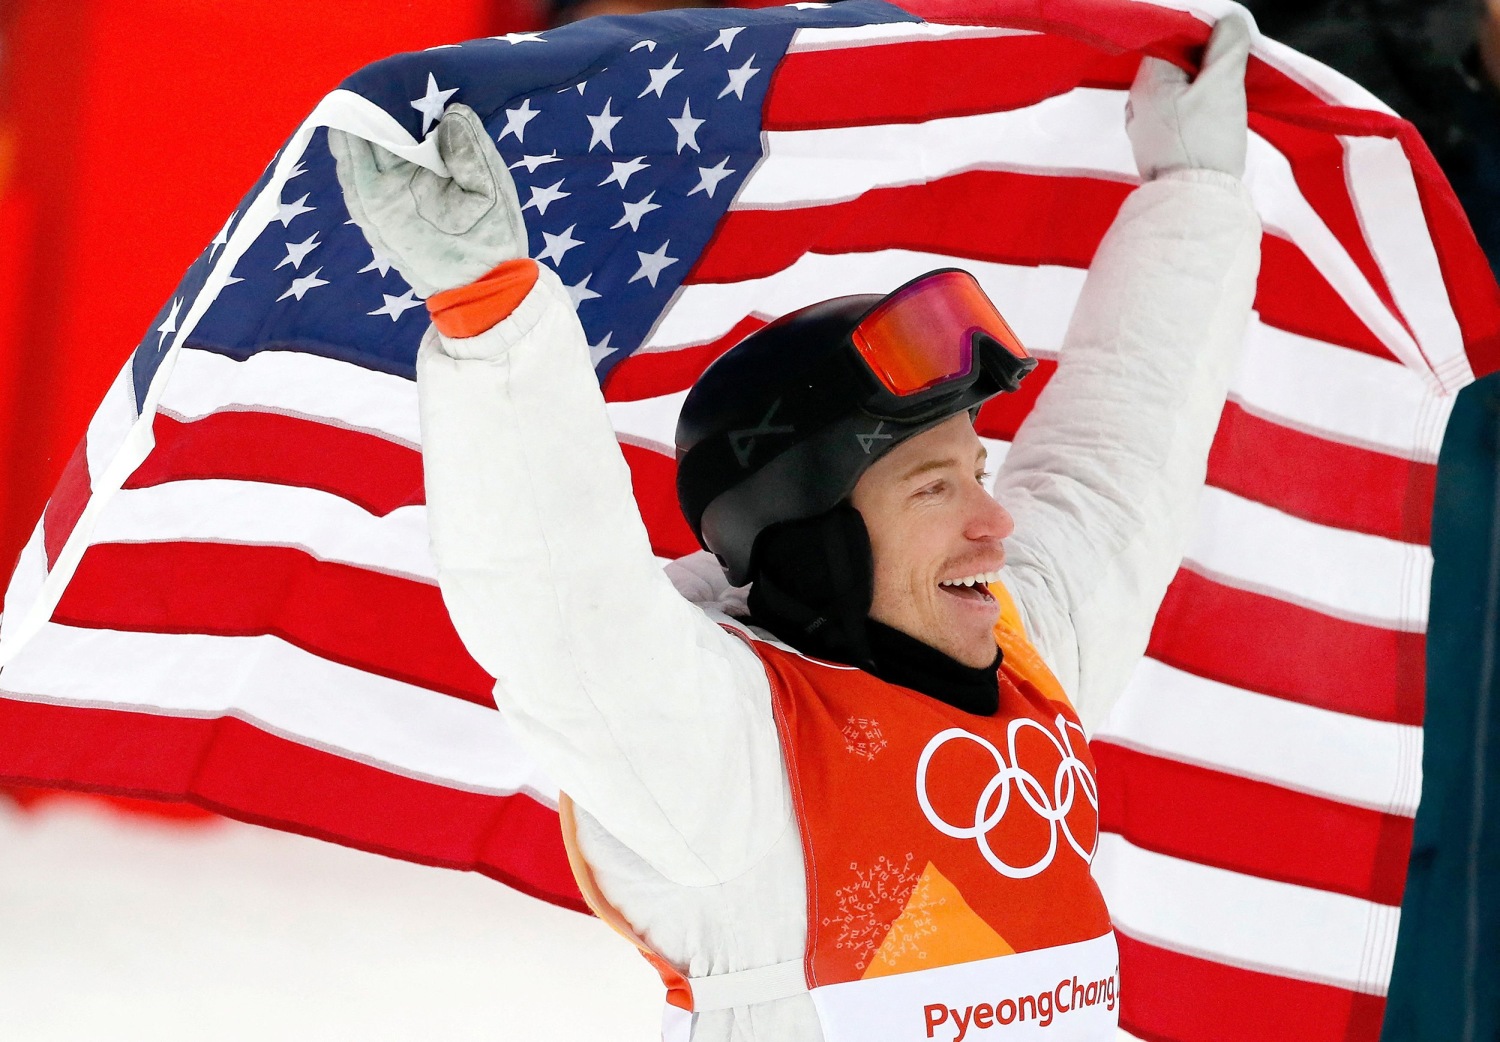 Shaun White on His 'Heavy Decision' to Retire at the Beijing Olympics